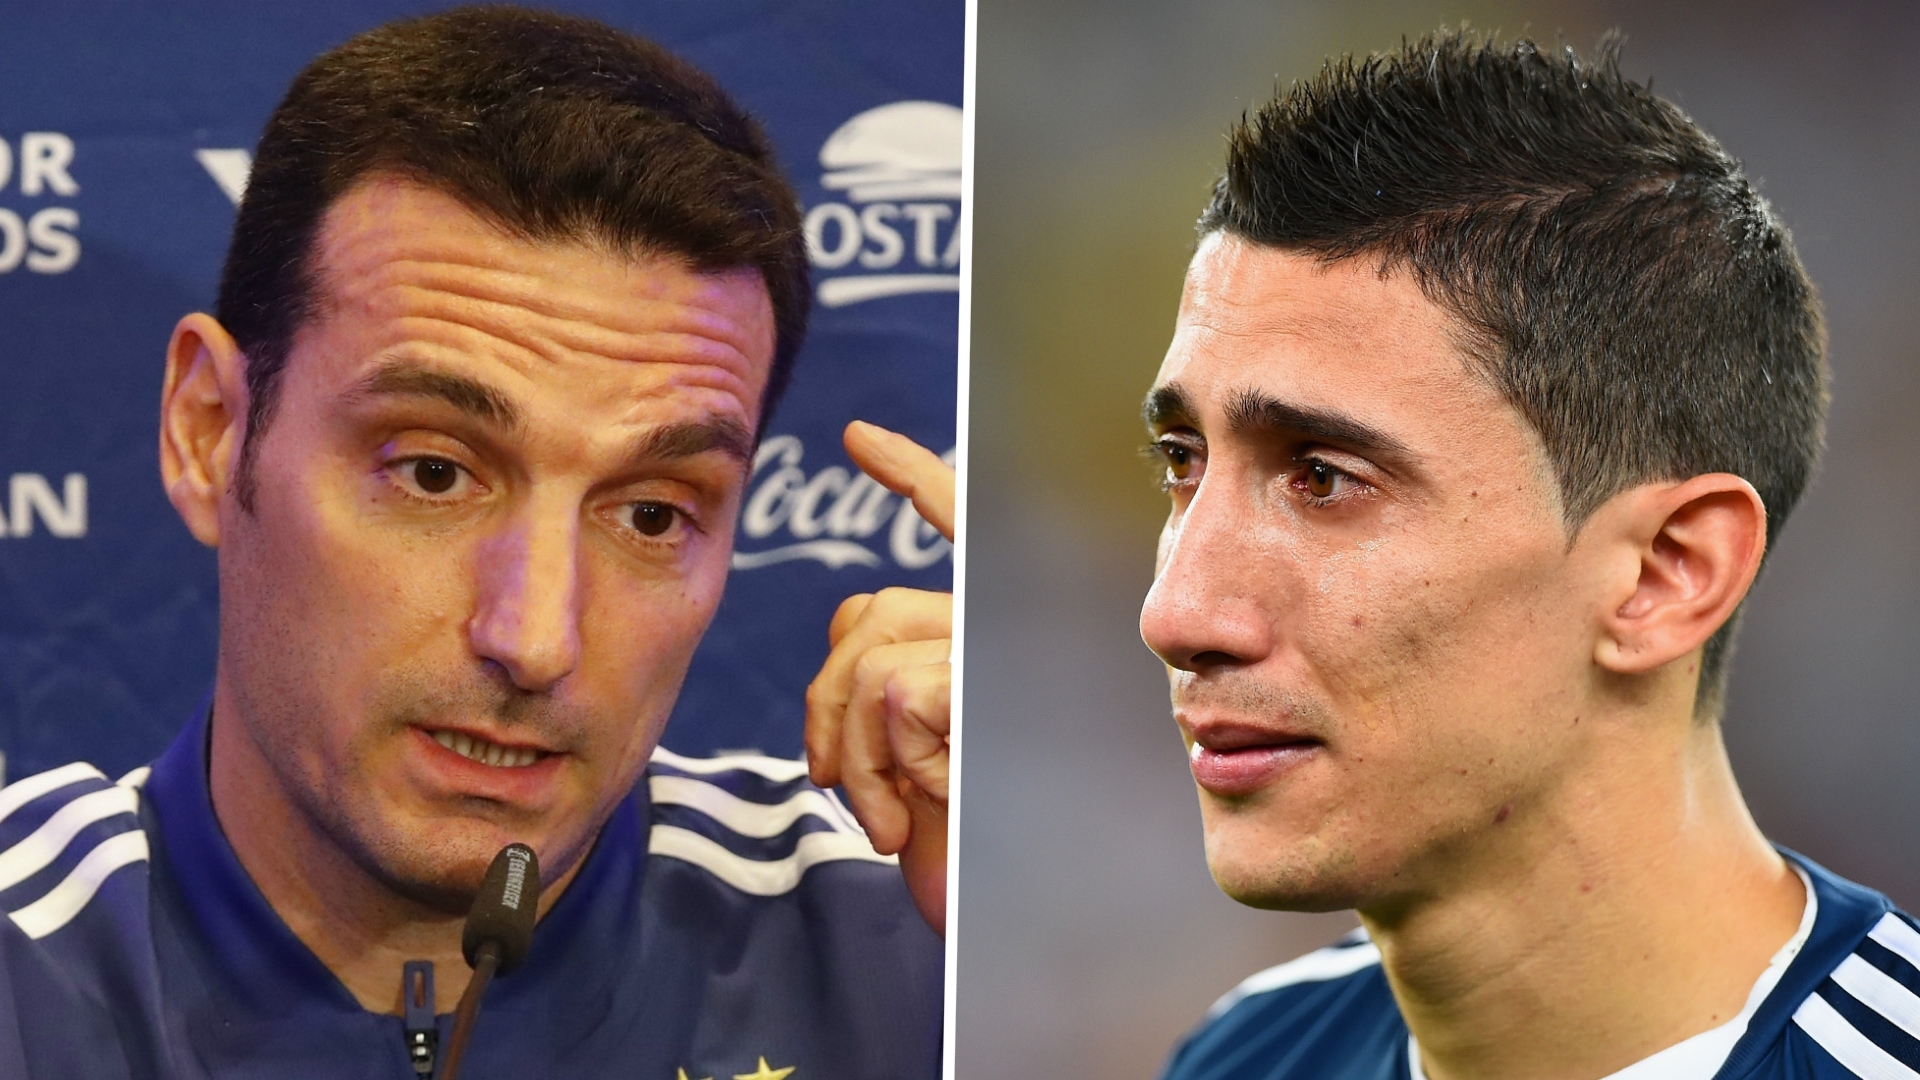 Scaloni tells Di Maria to 'support from the outside' in response to PSG star's Argentina snub rant